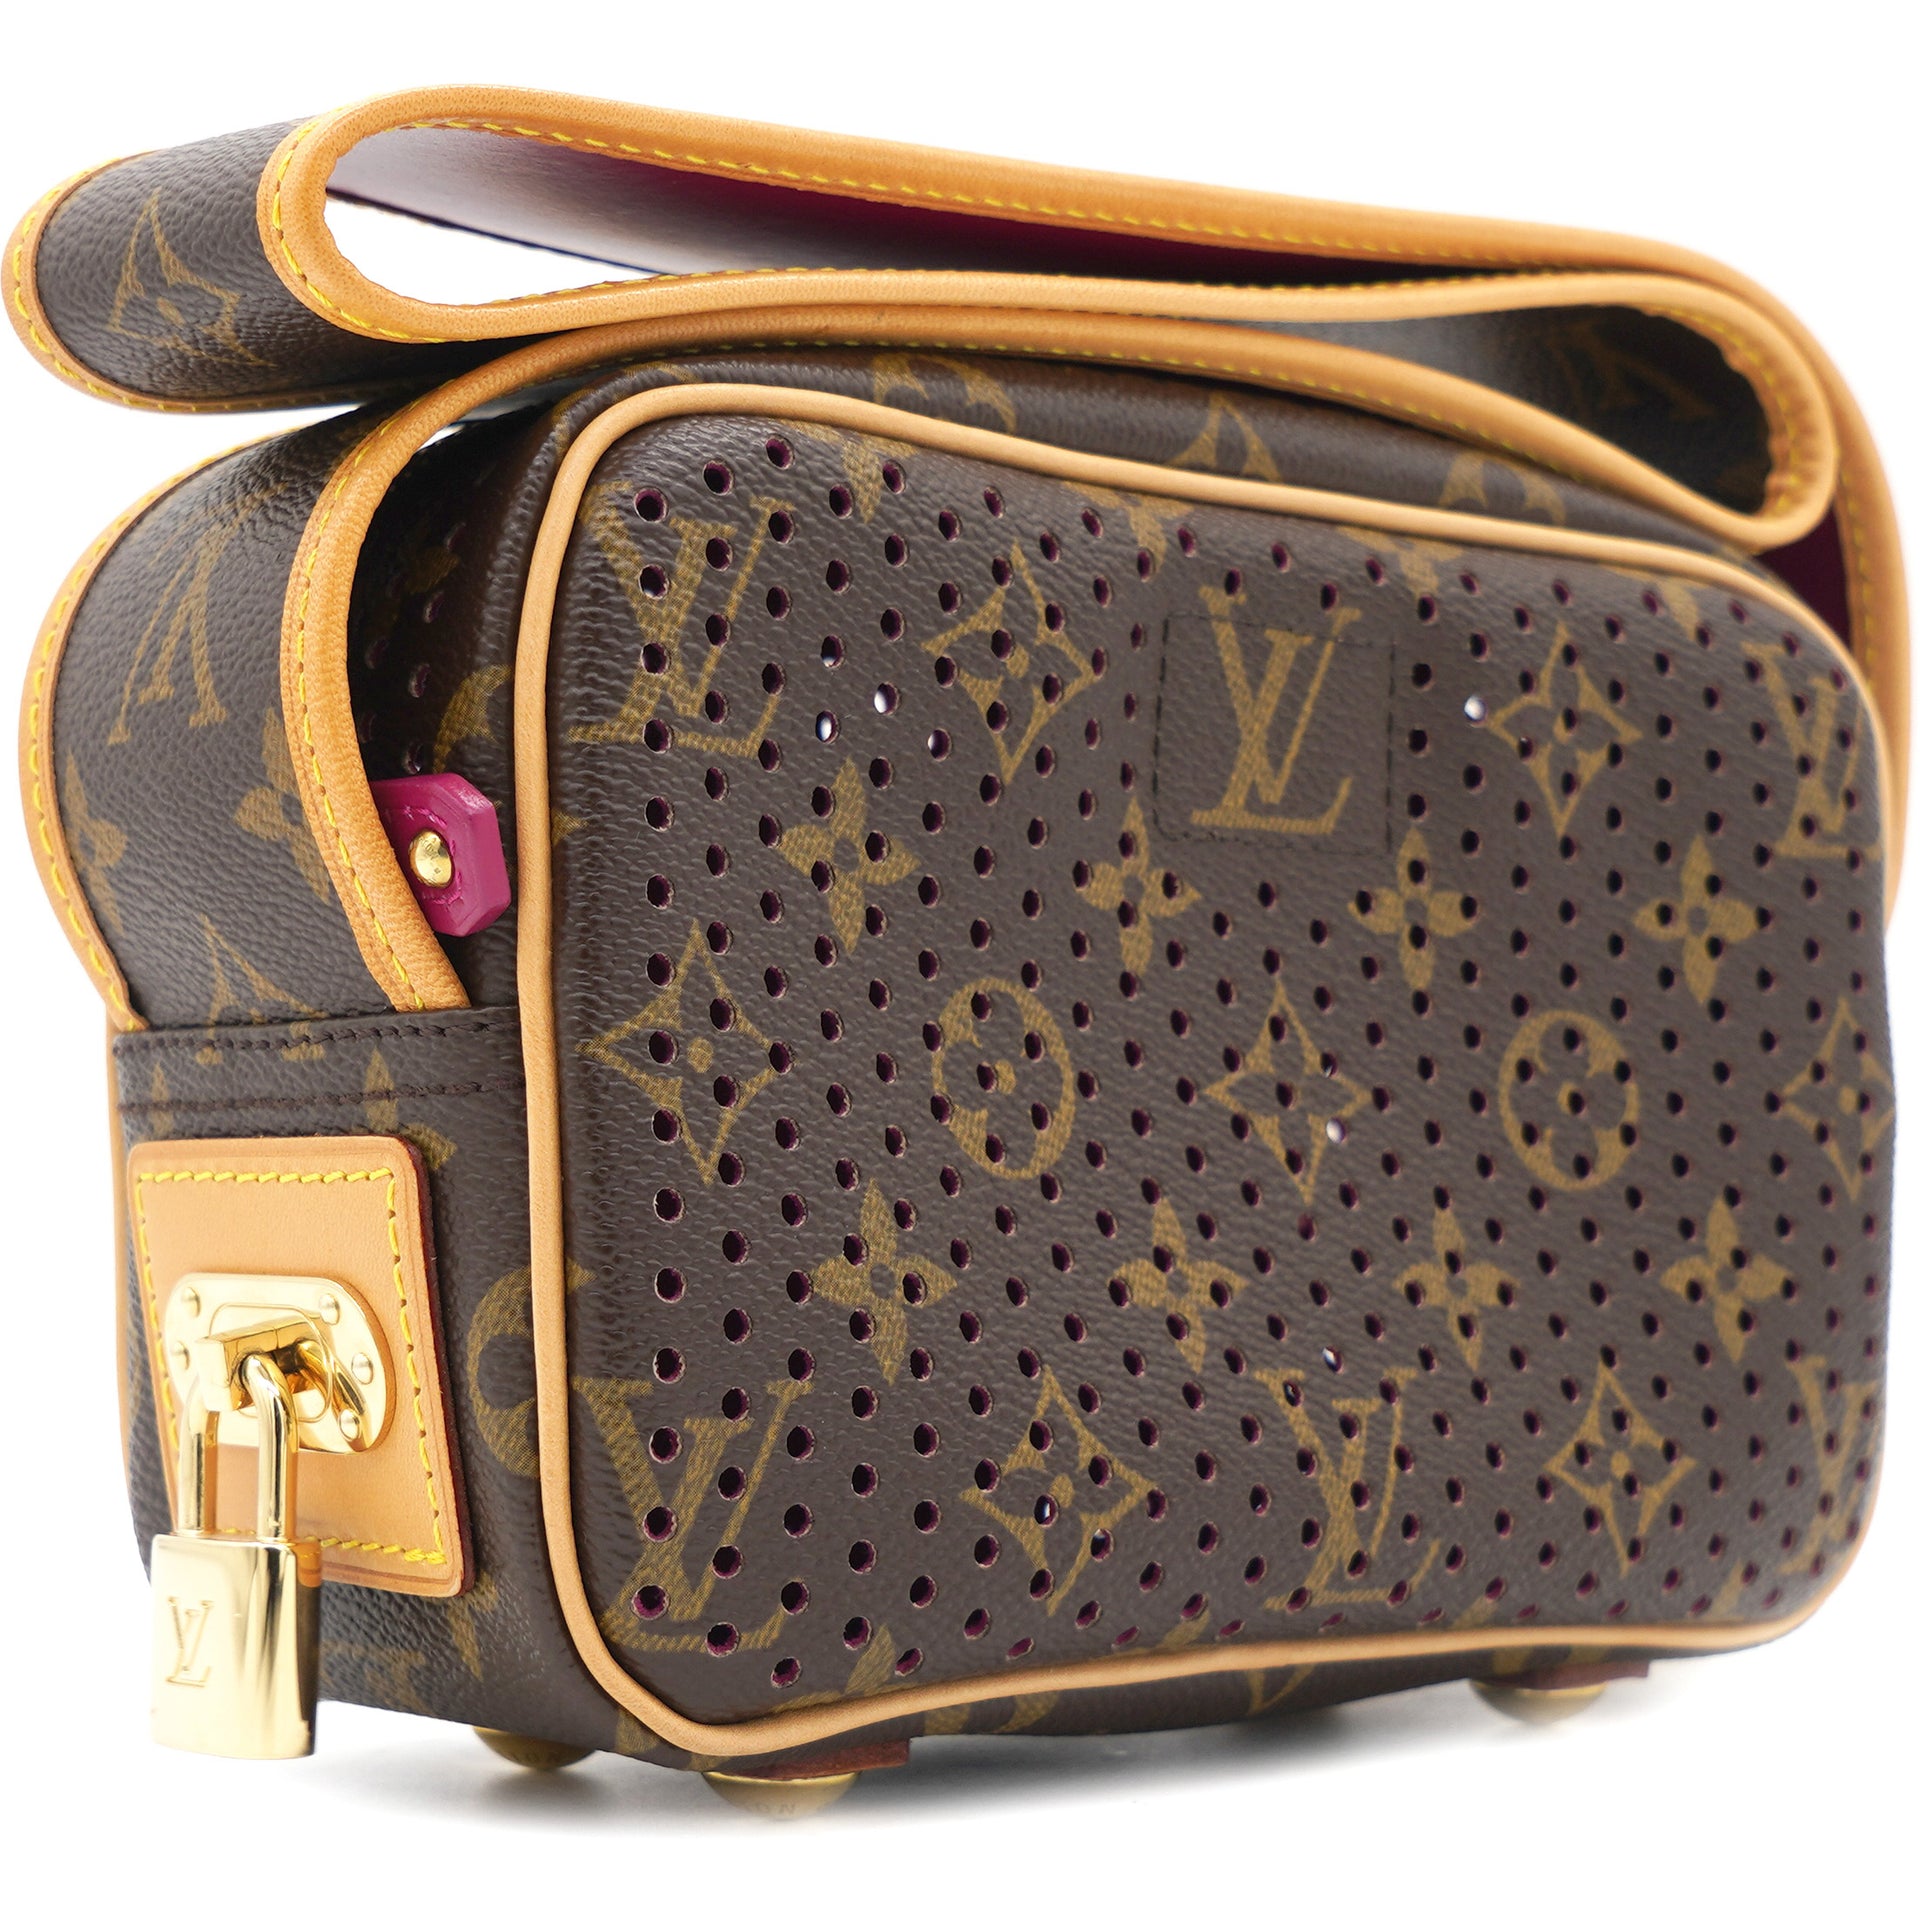 Sold Louis Vuitton Monogram Pochette Perforated Pink